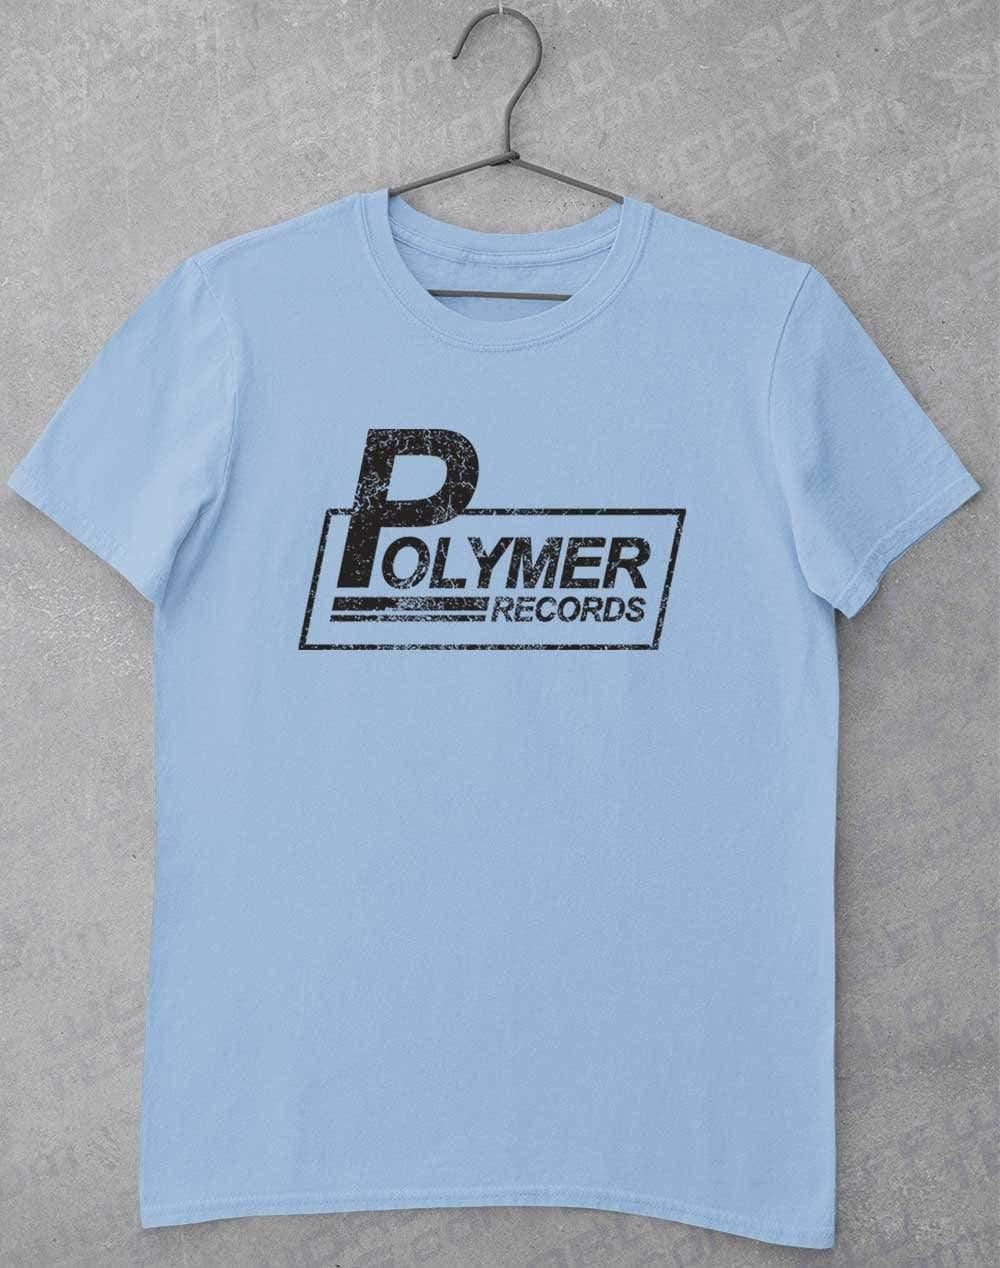 Polymer Records Distressed Logo T-Shirt S / Light Blue  - Off World Tees